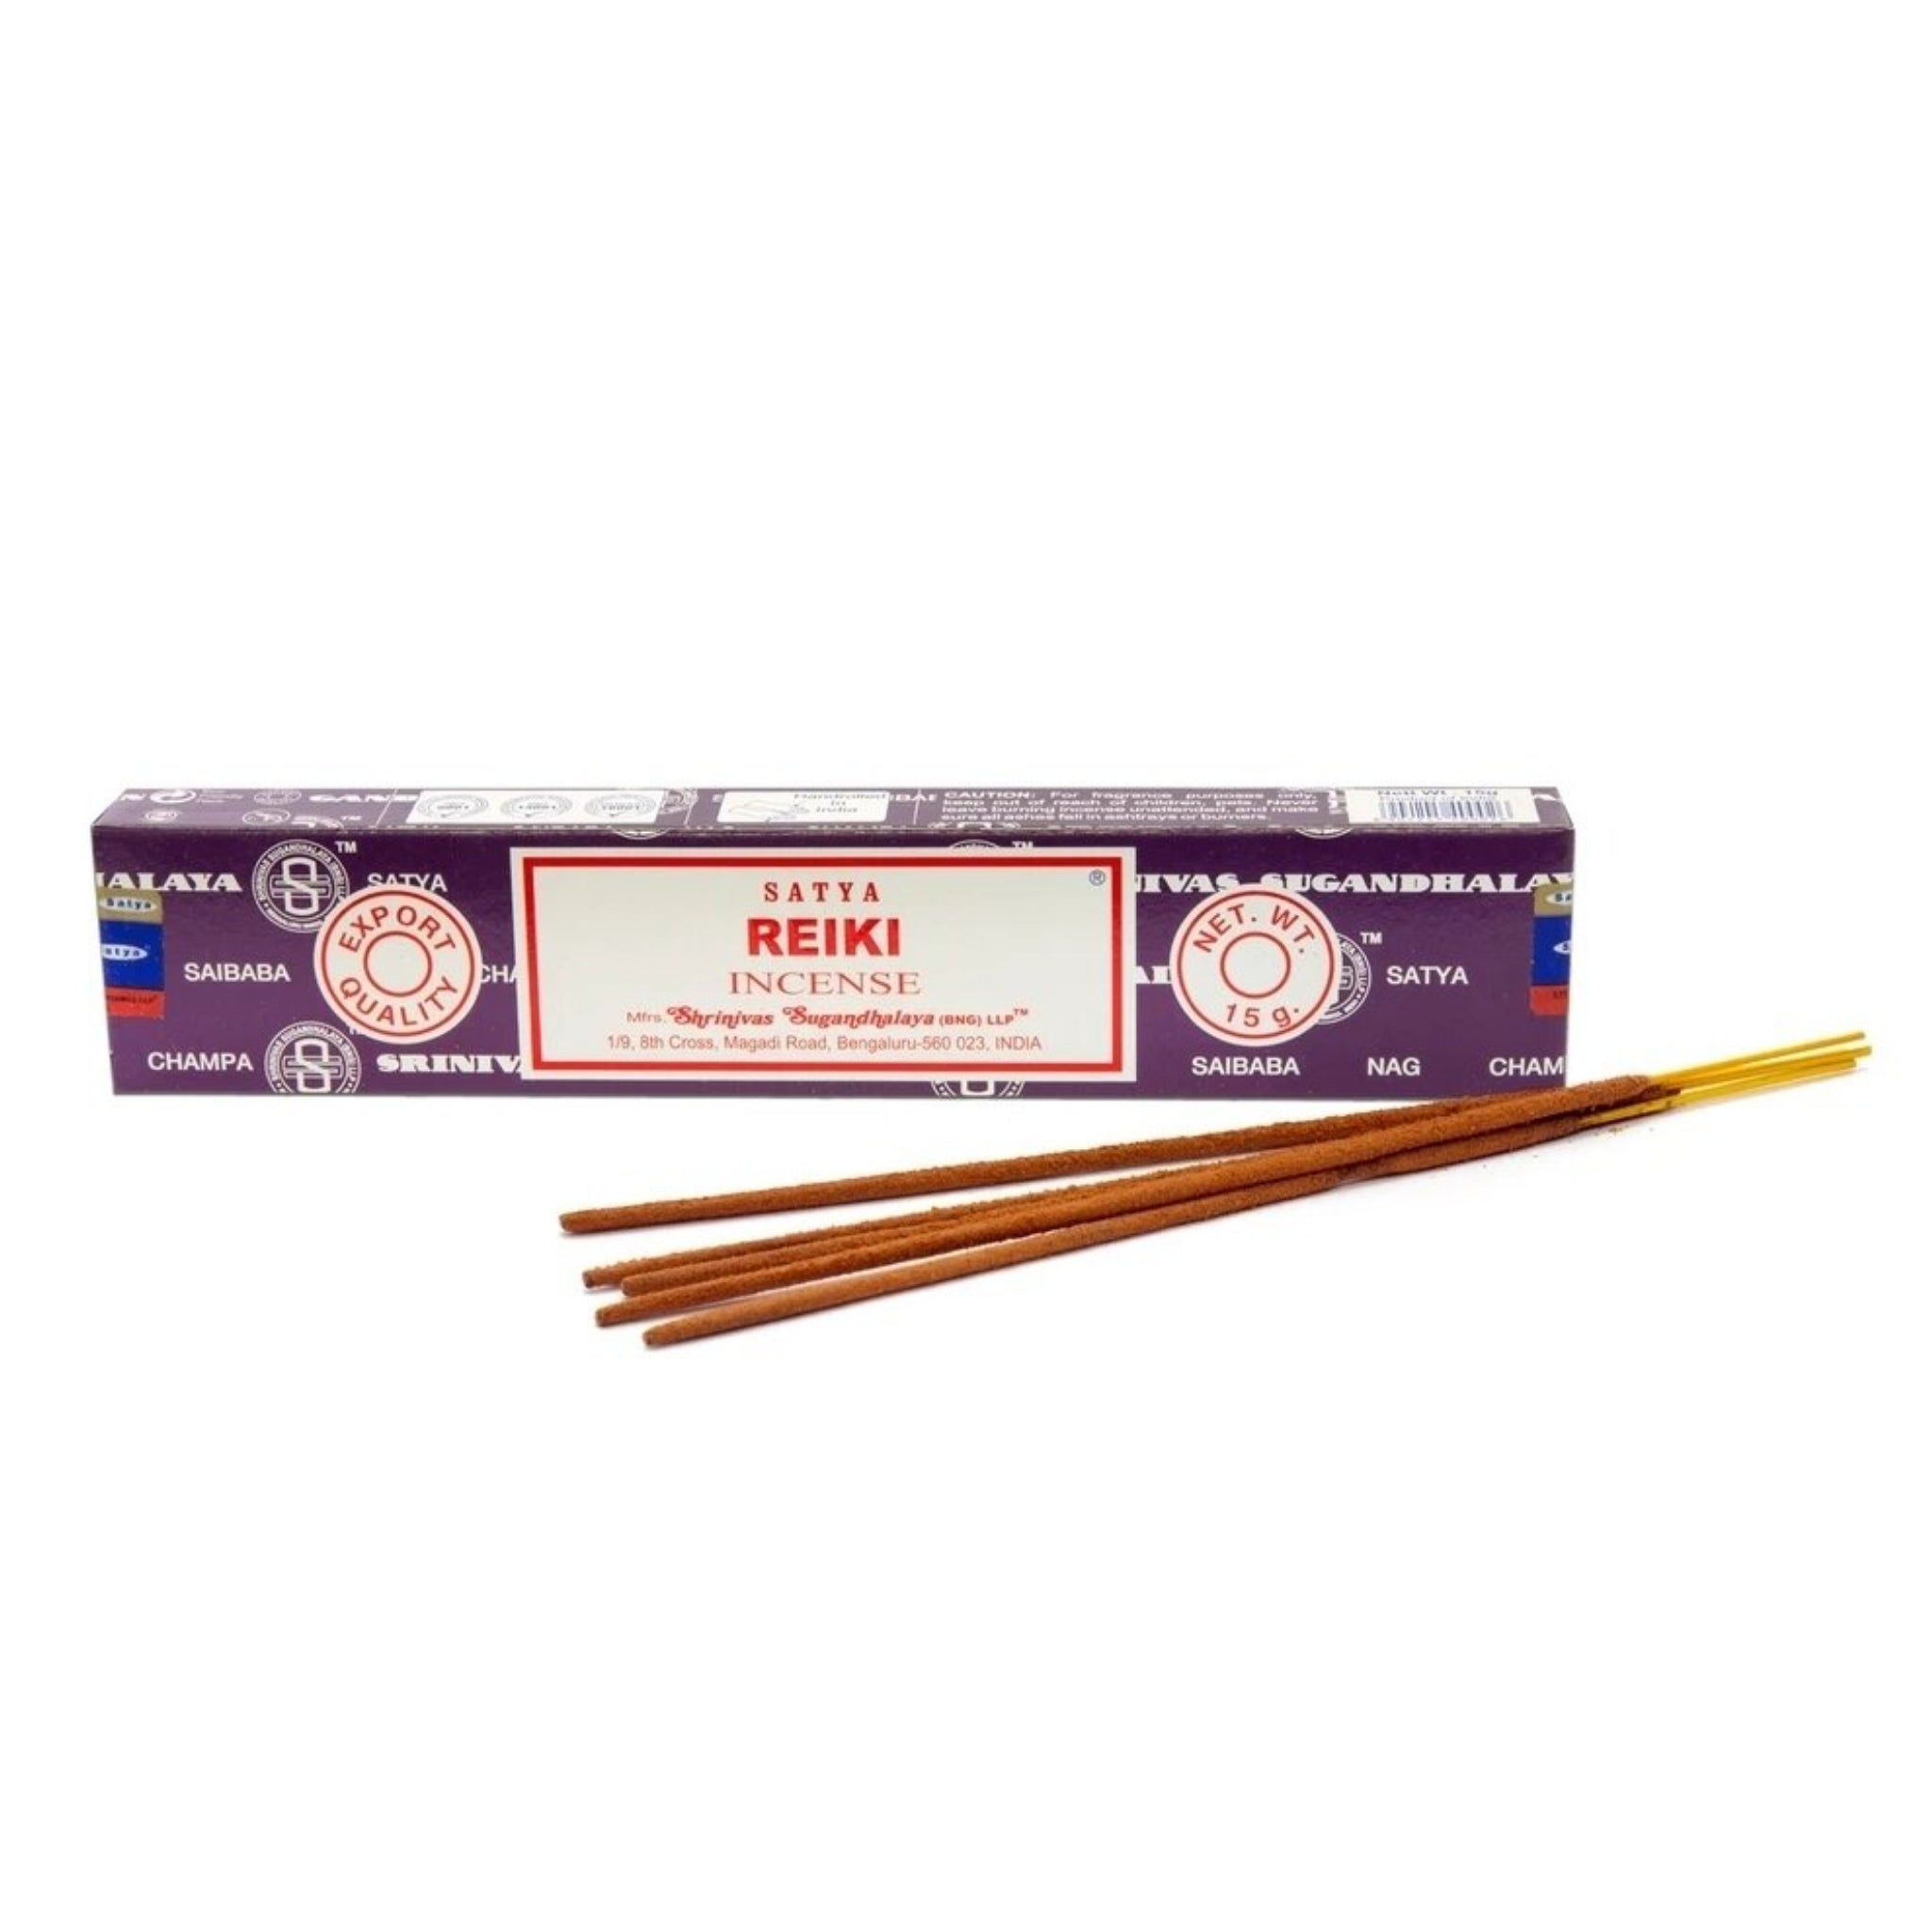 Reiki Hand-dipped Incense